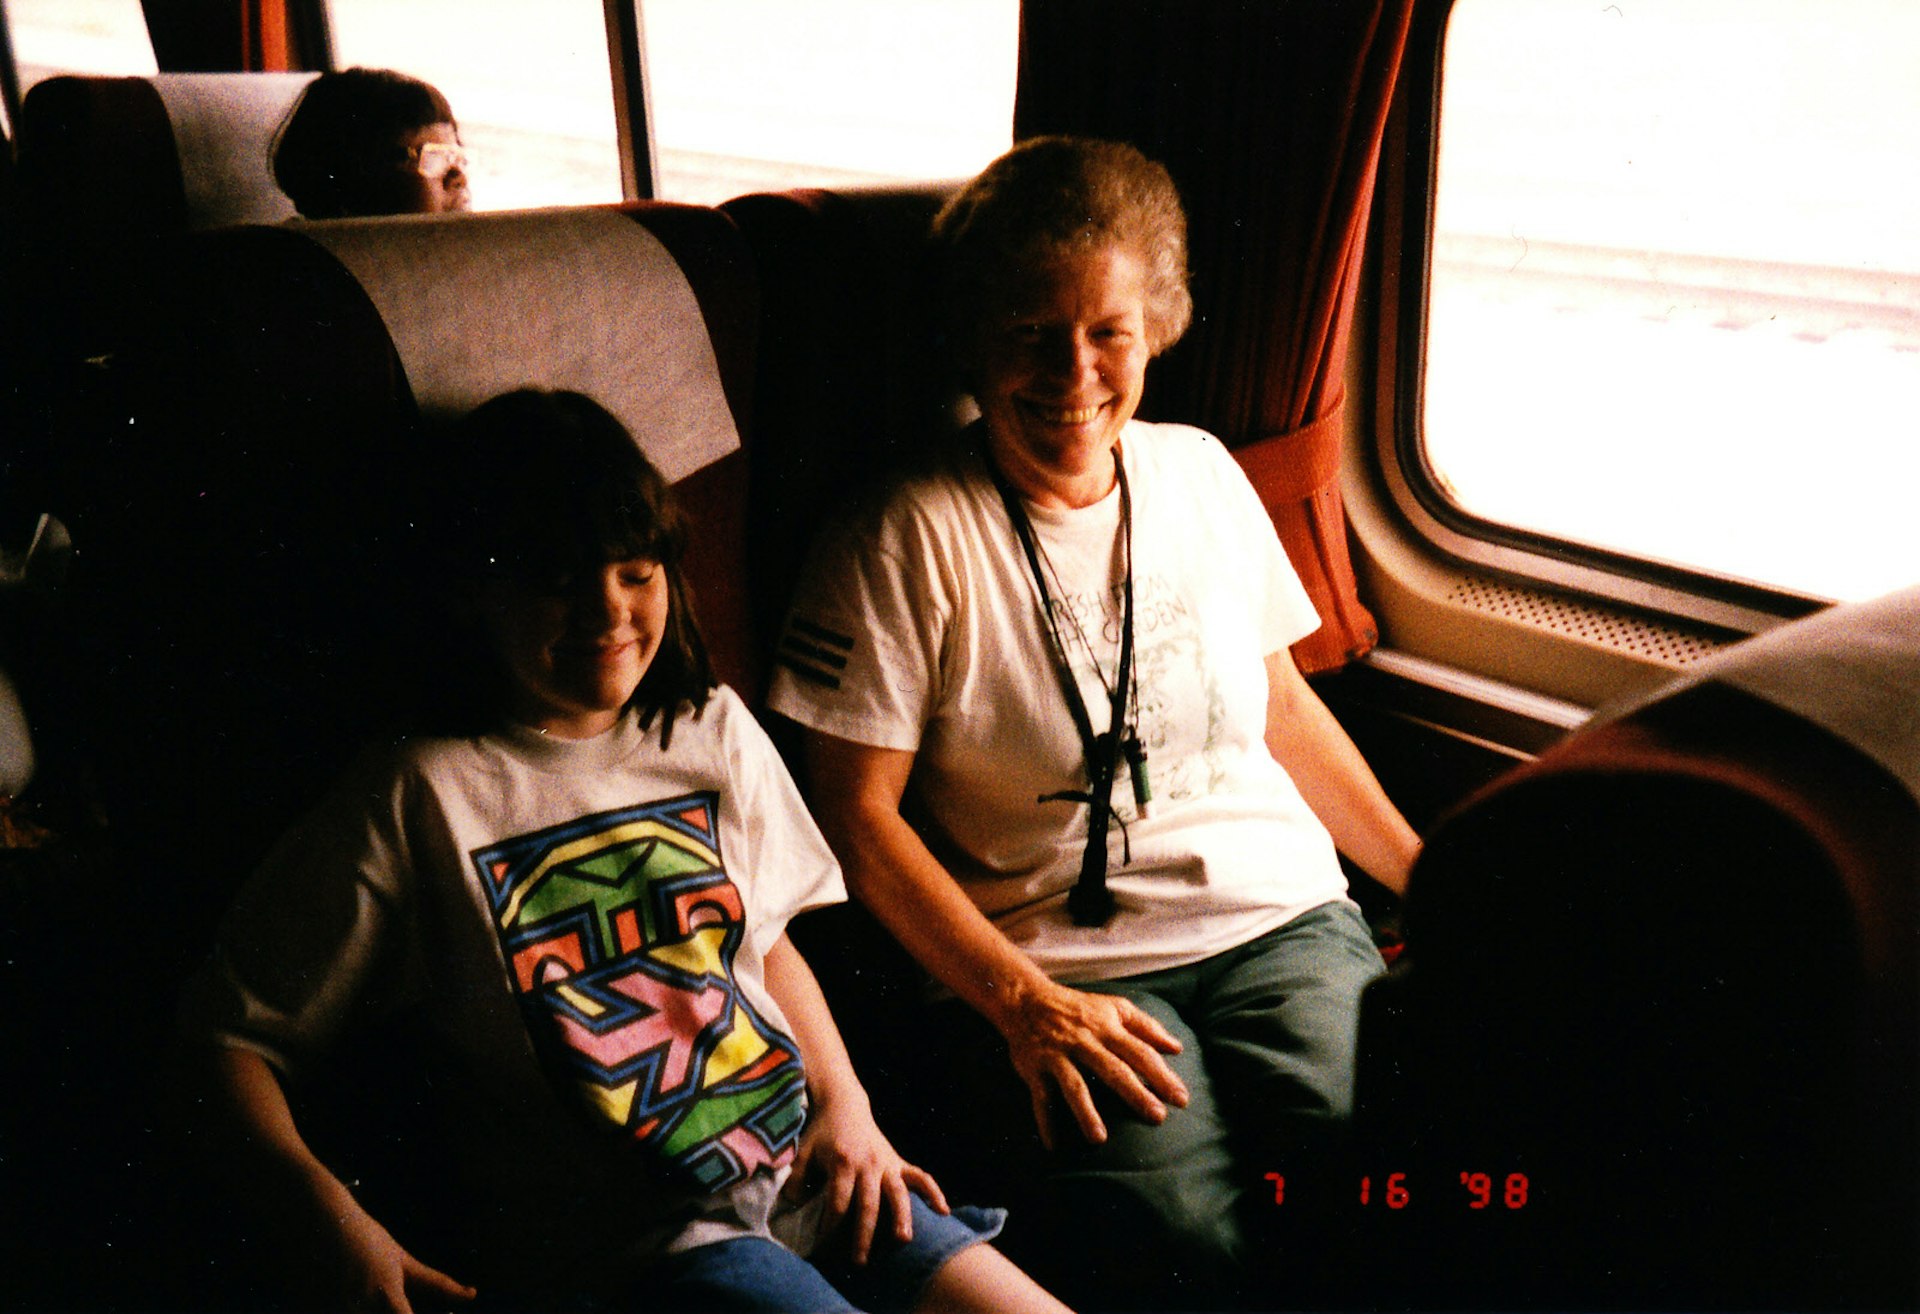 Meghan as a teenager and her grandmother smile at the camera sitting in an Amtrak train carriage